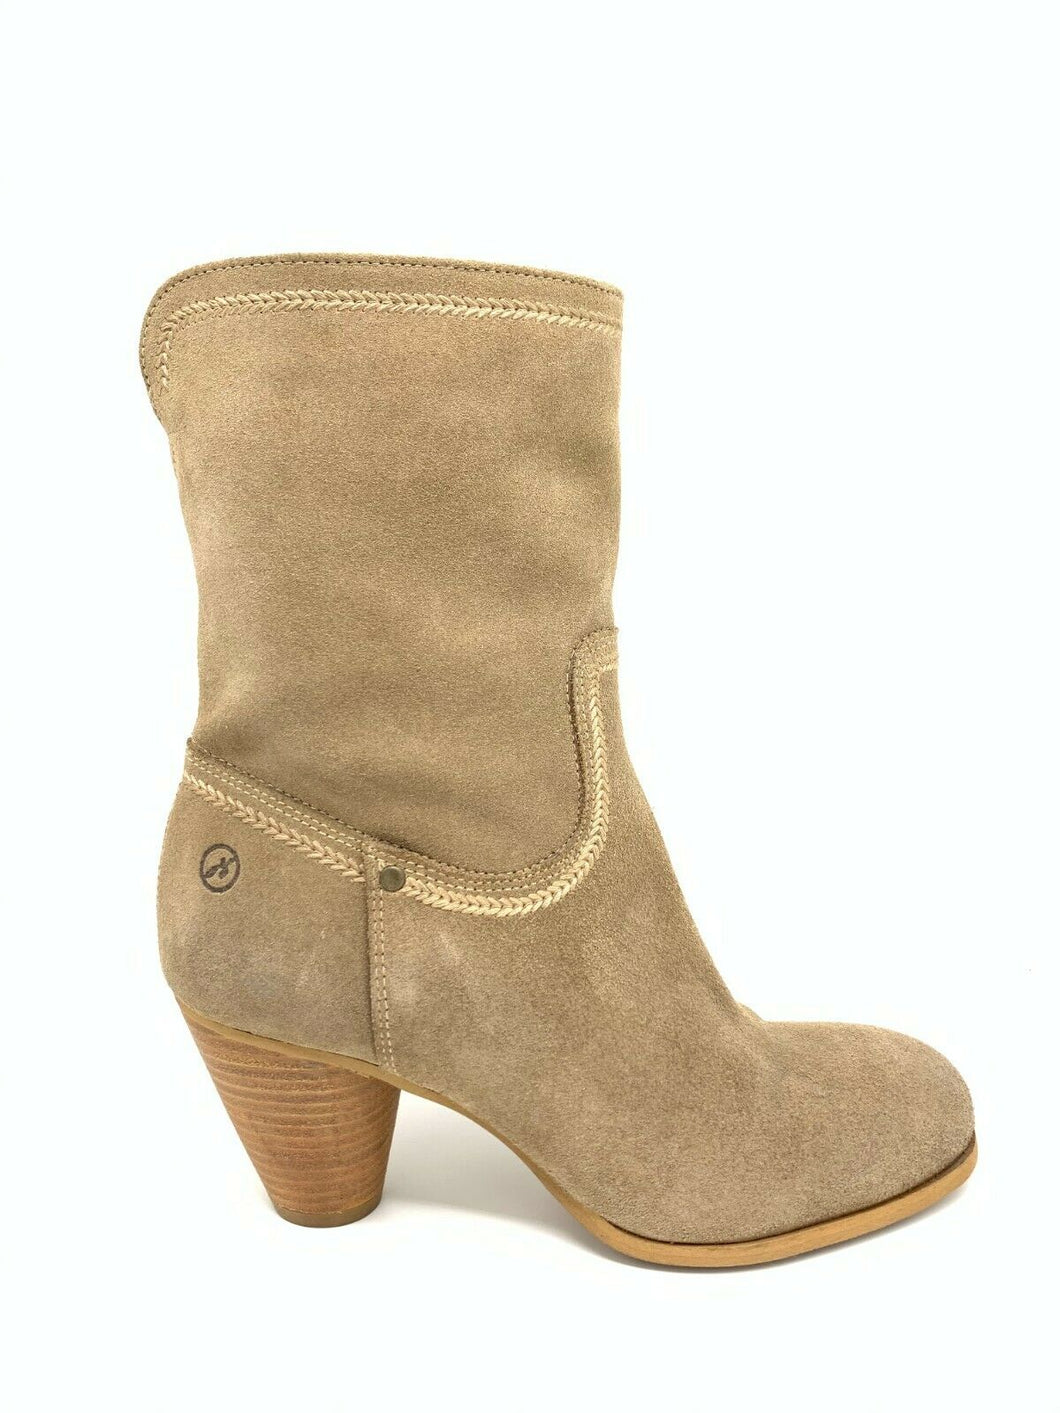 Bronx Boots Ankle Boots Women Pilot Beige Real Leather NEW